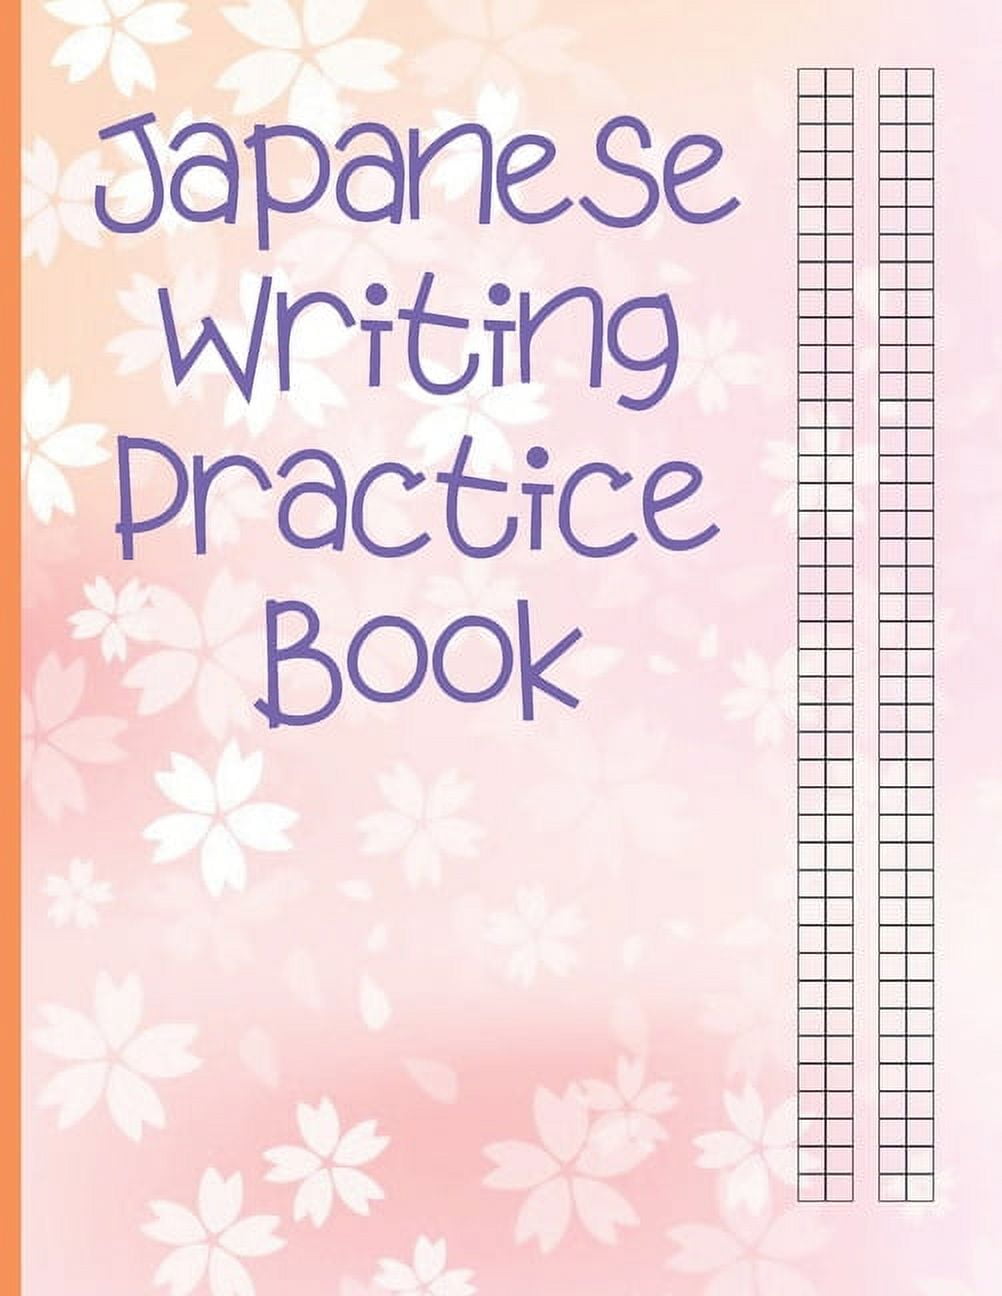 Japanese Writing Practice Book Graphic by MetaDesigns · Creative